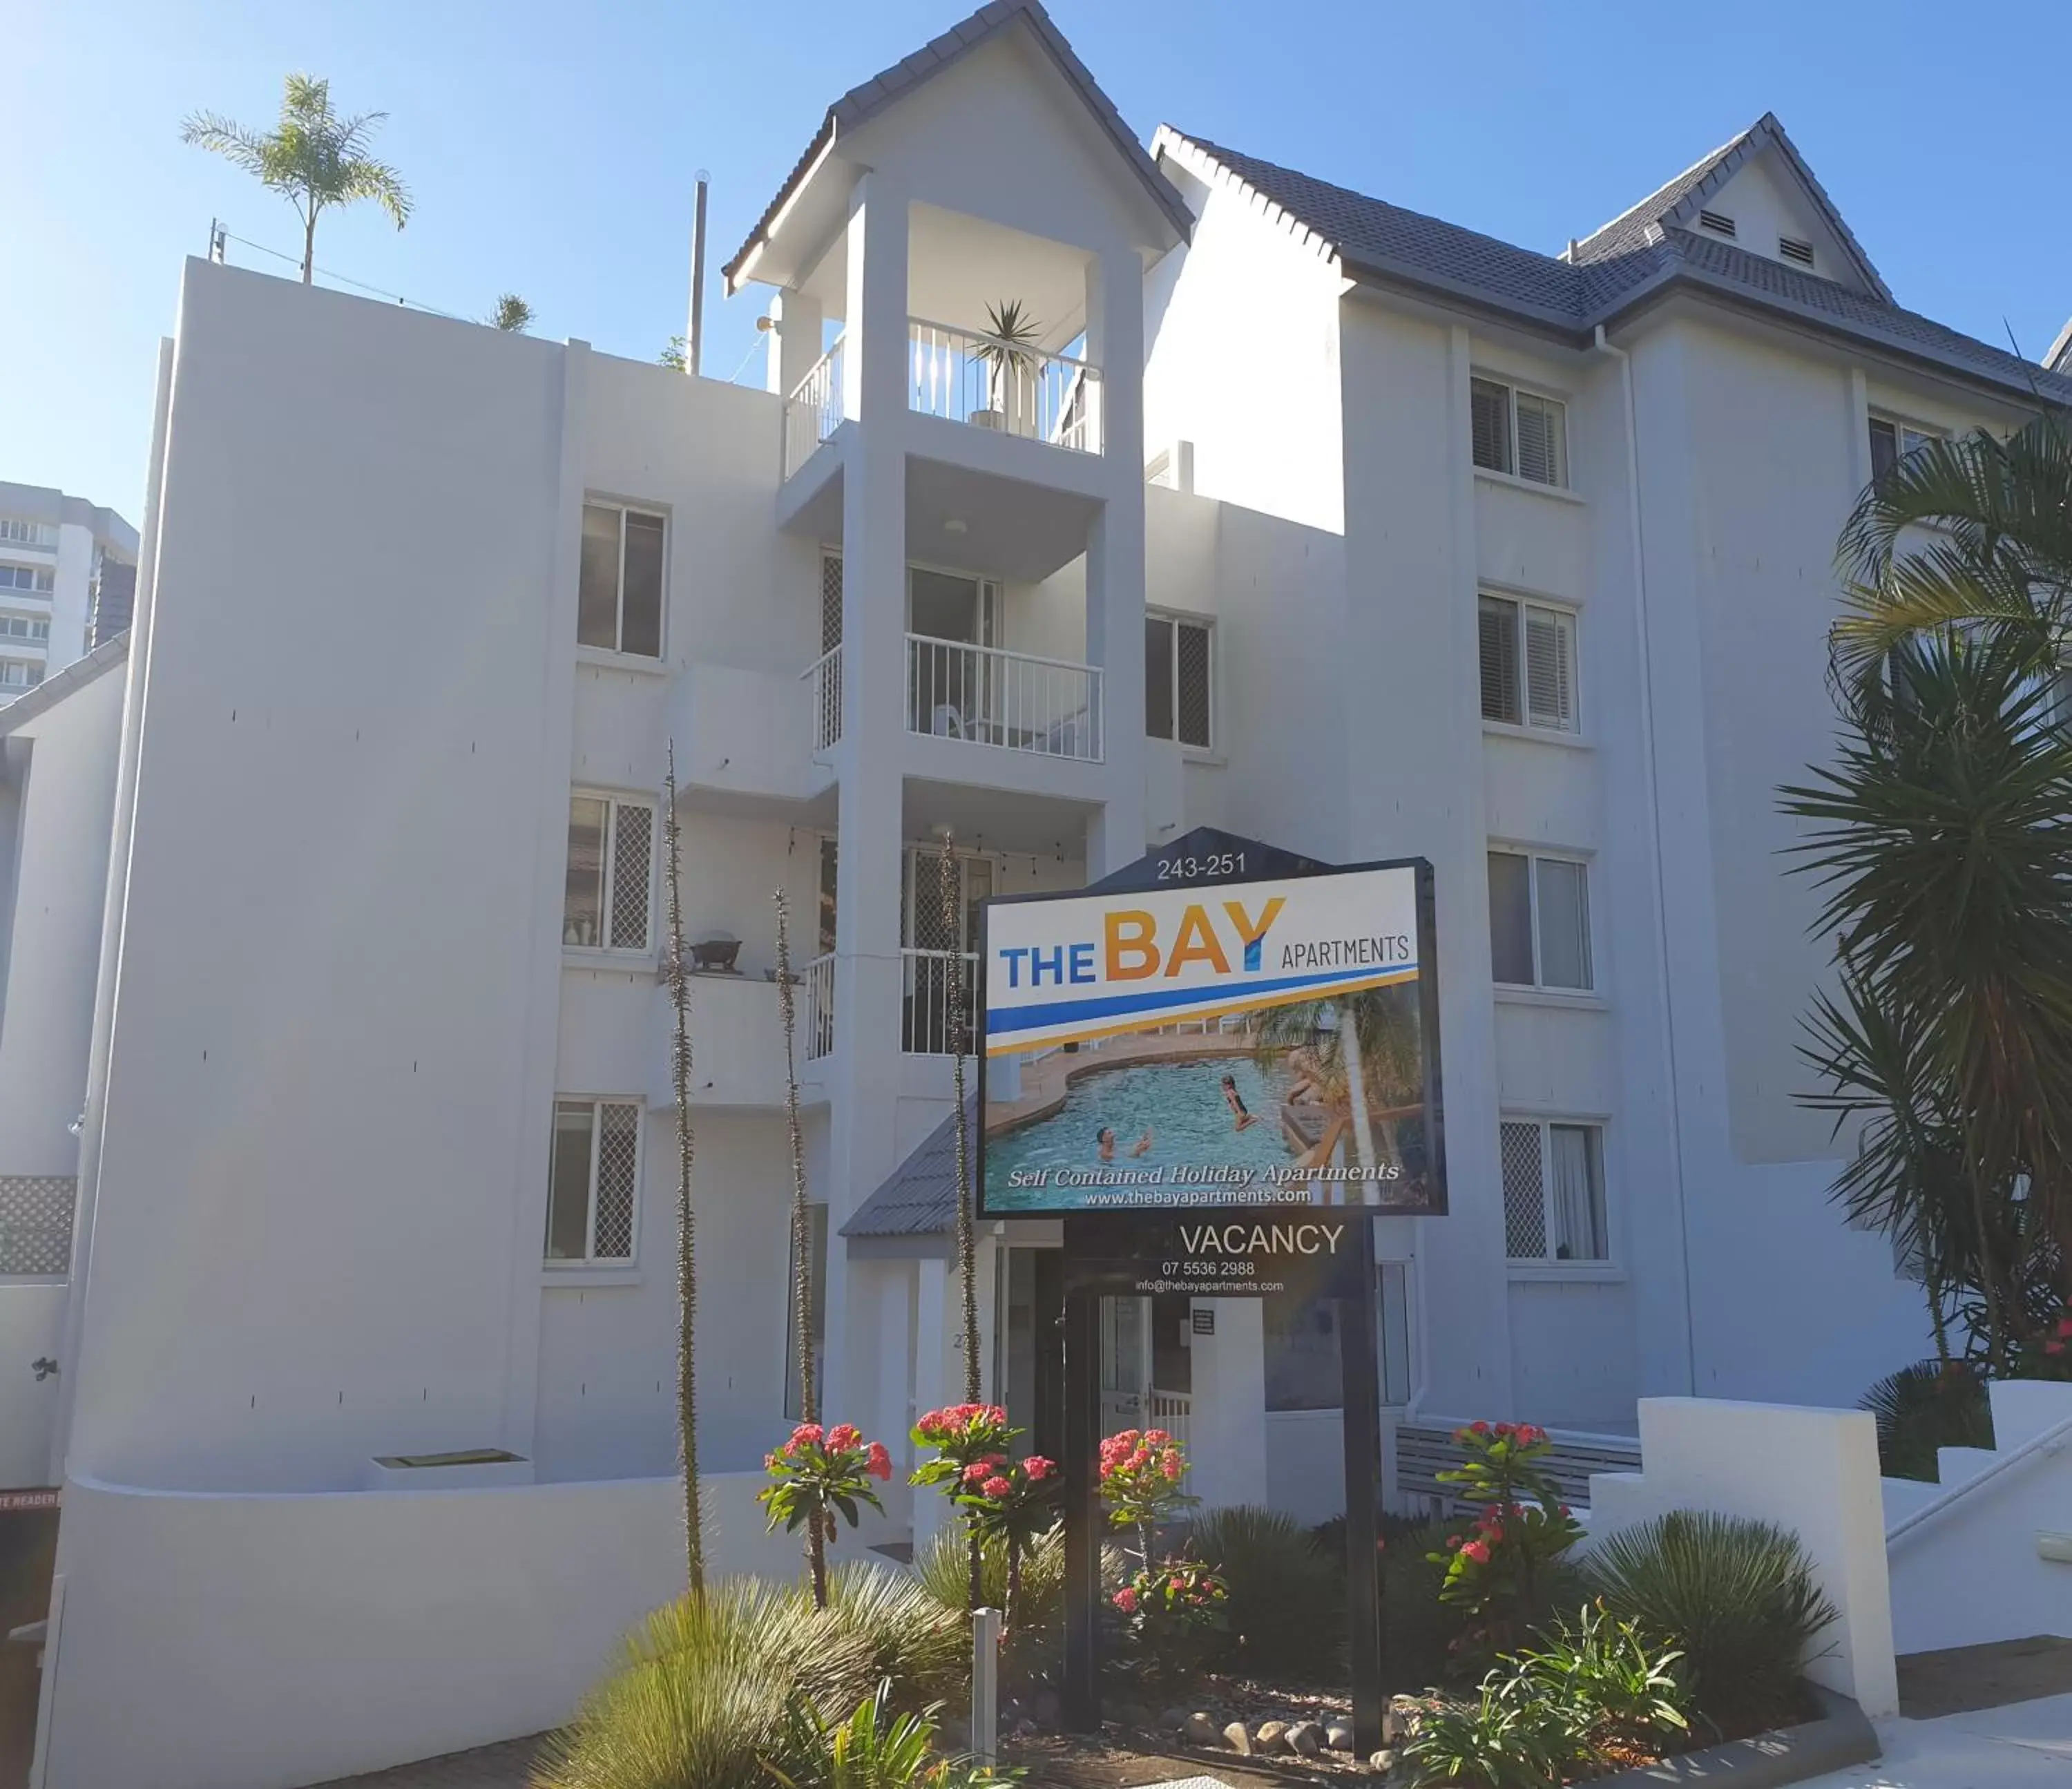 Property Building in The Bay Apartments Coolangatta